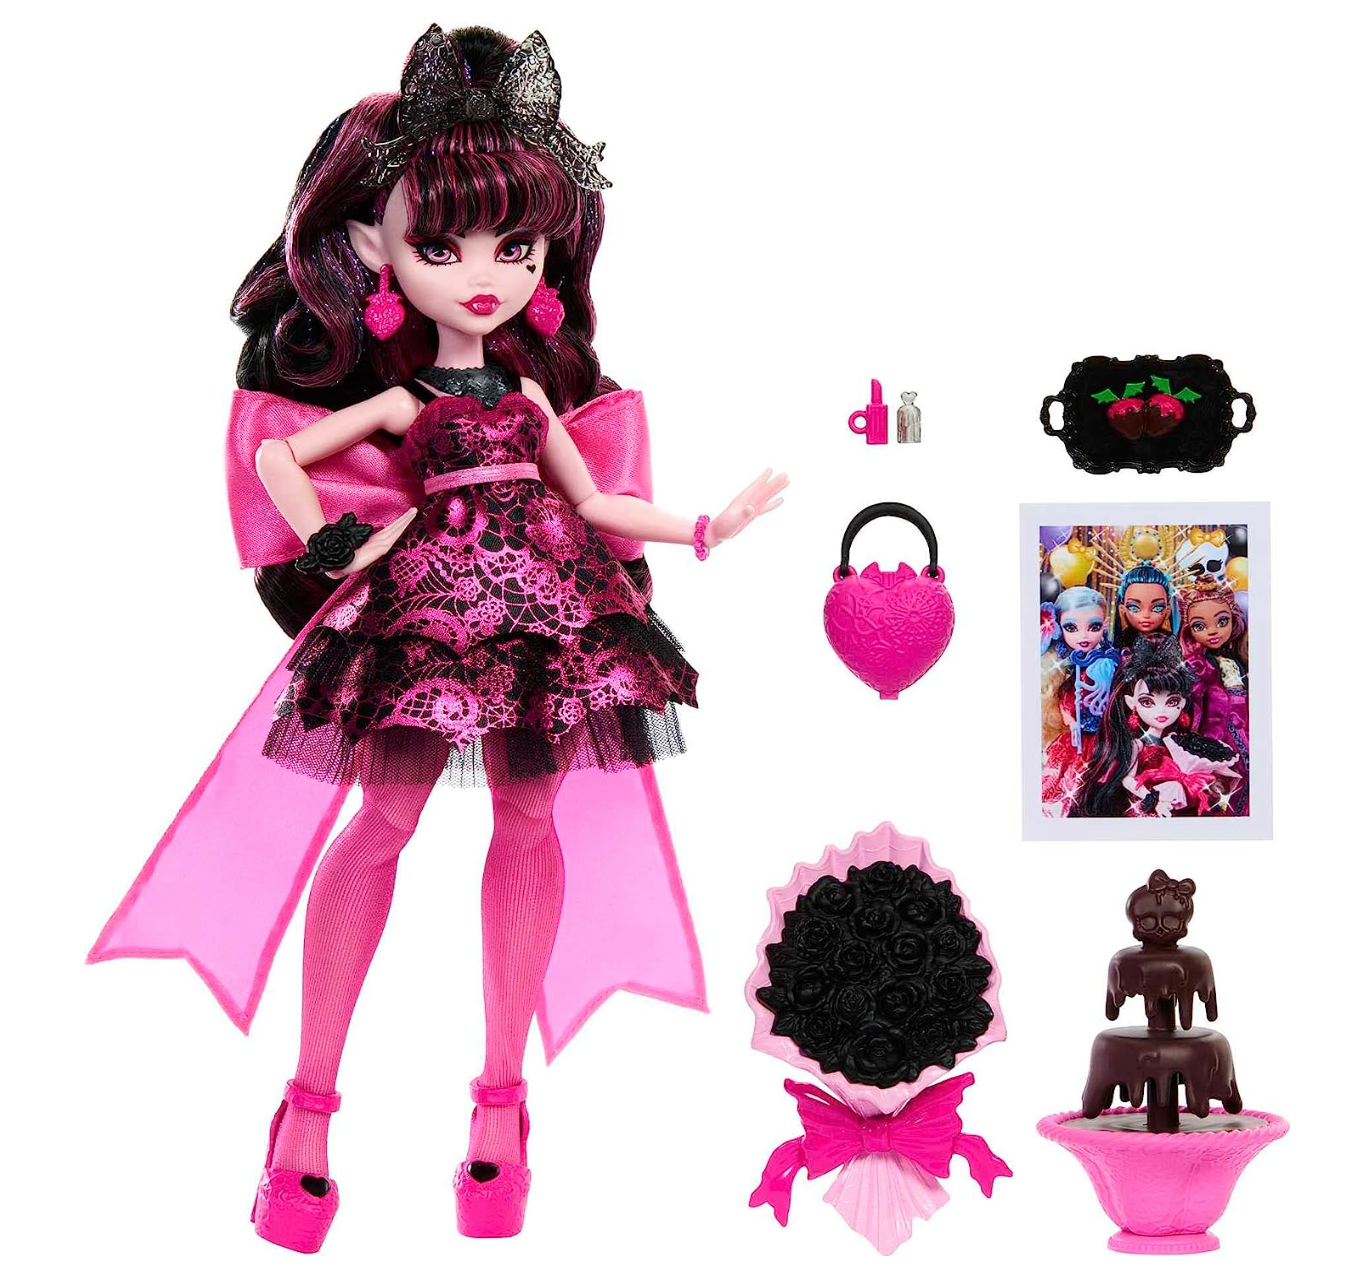 Monster High Draculaura Doll in Monster Ball Party Dress with Themed Accessories Like Chocolate Fountain